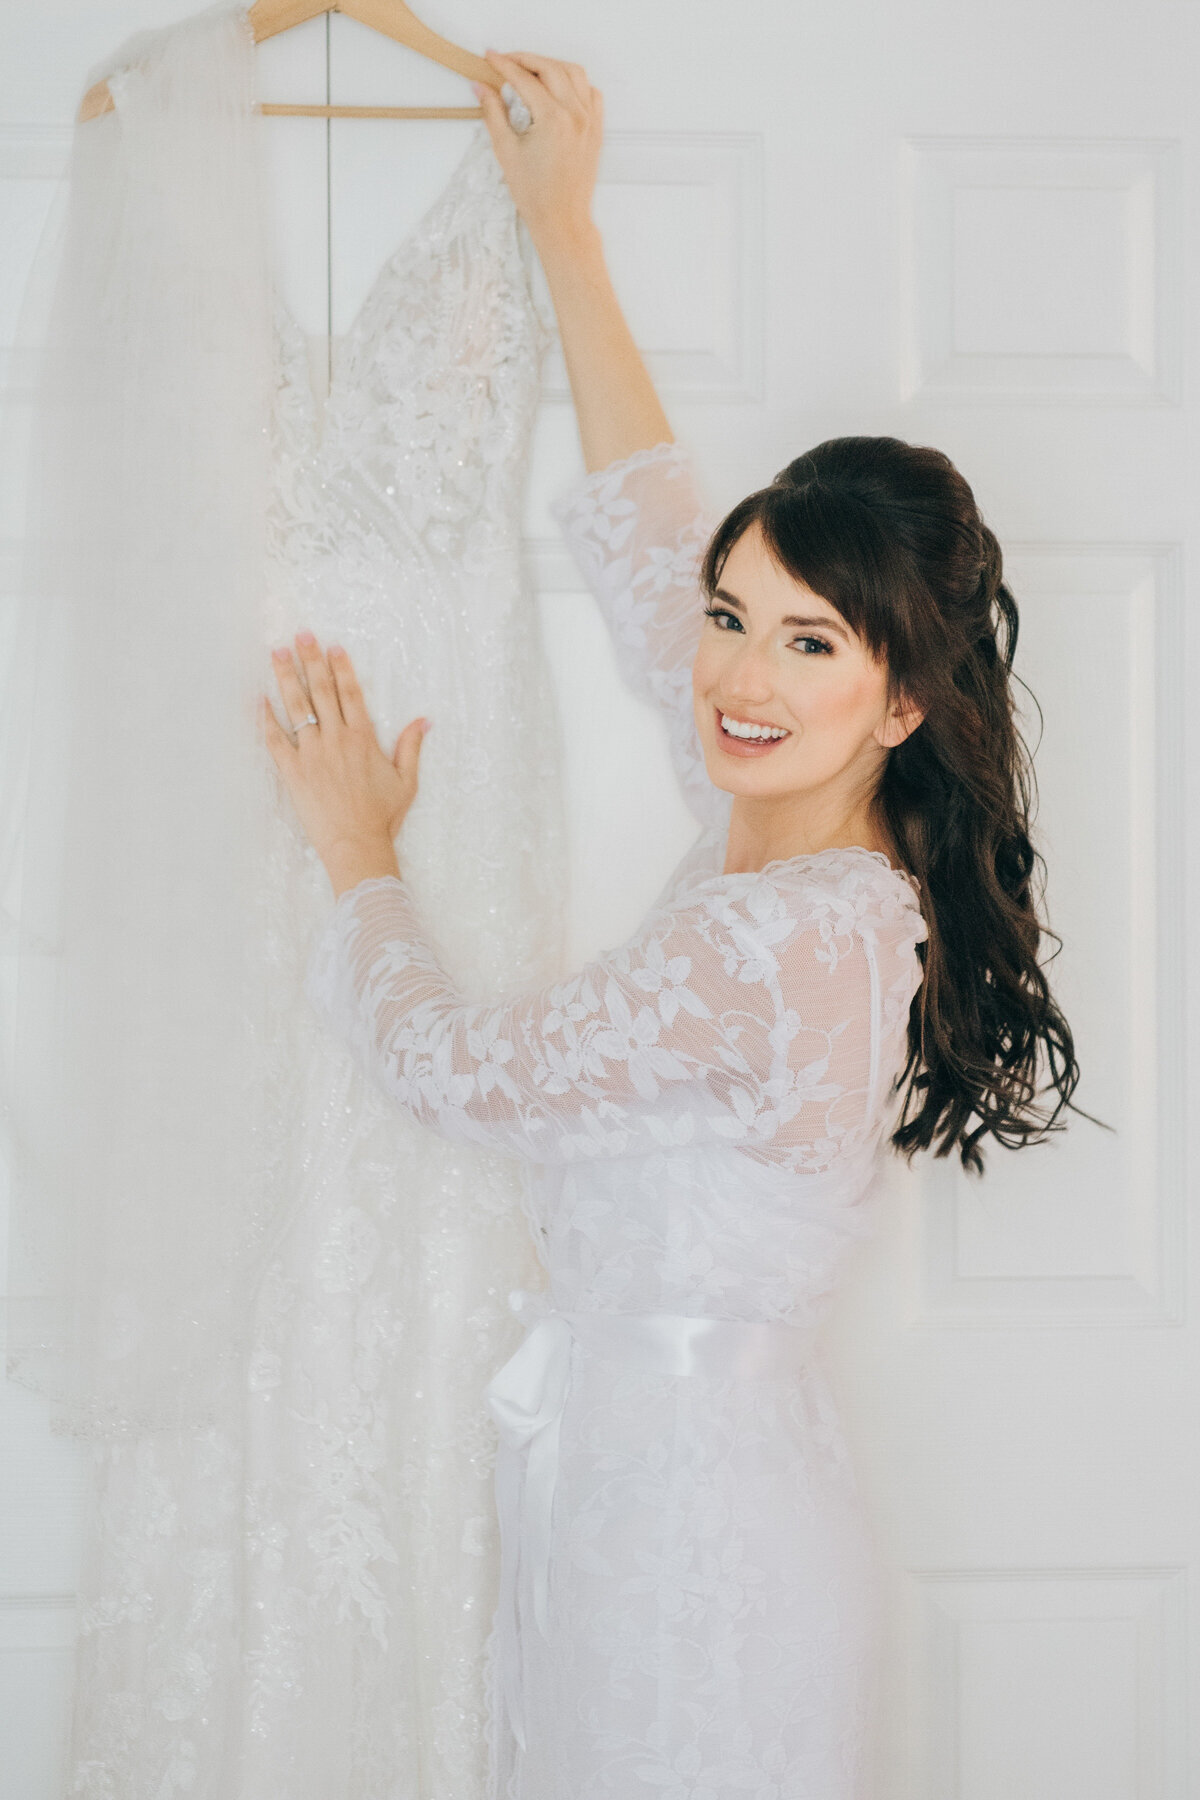 A bride posing with her wedding gown